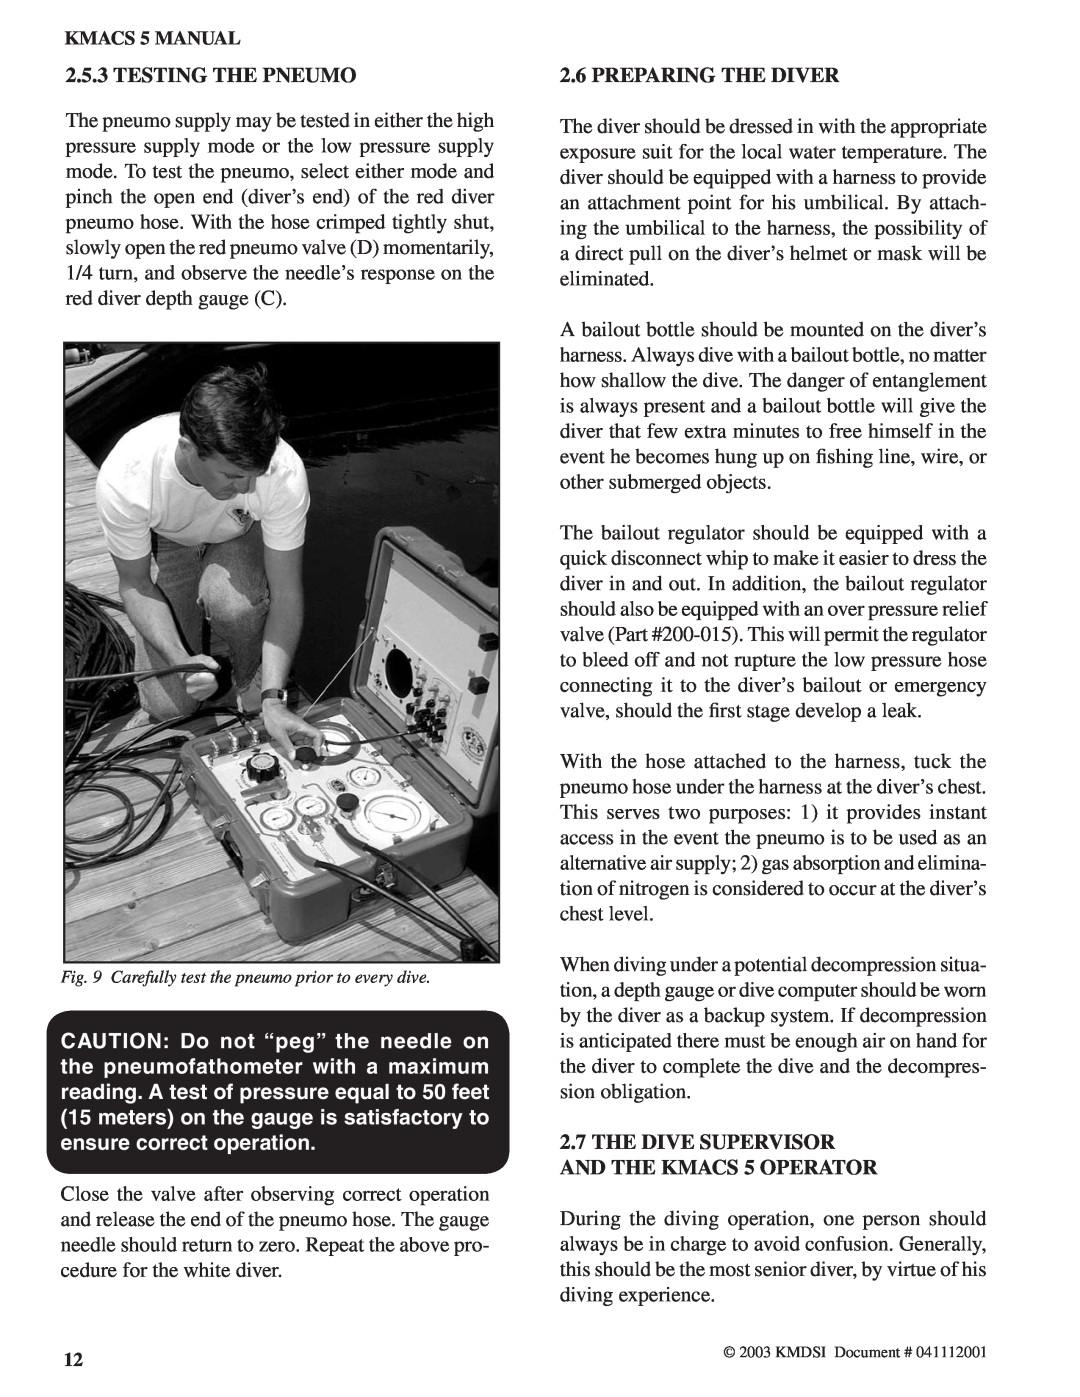 Kirby Air Control System manual Testing The Pneumo, Preparing The Diver, 2.7THE DIVE SUPERVISOR AND THE KMACS 5 OPERATOR 